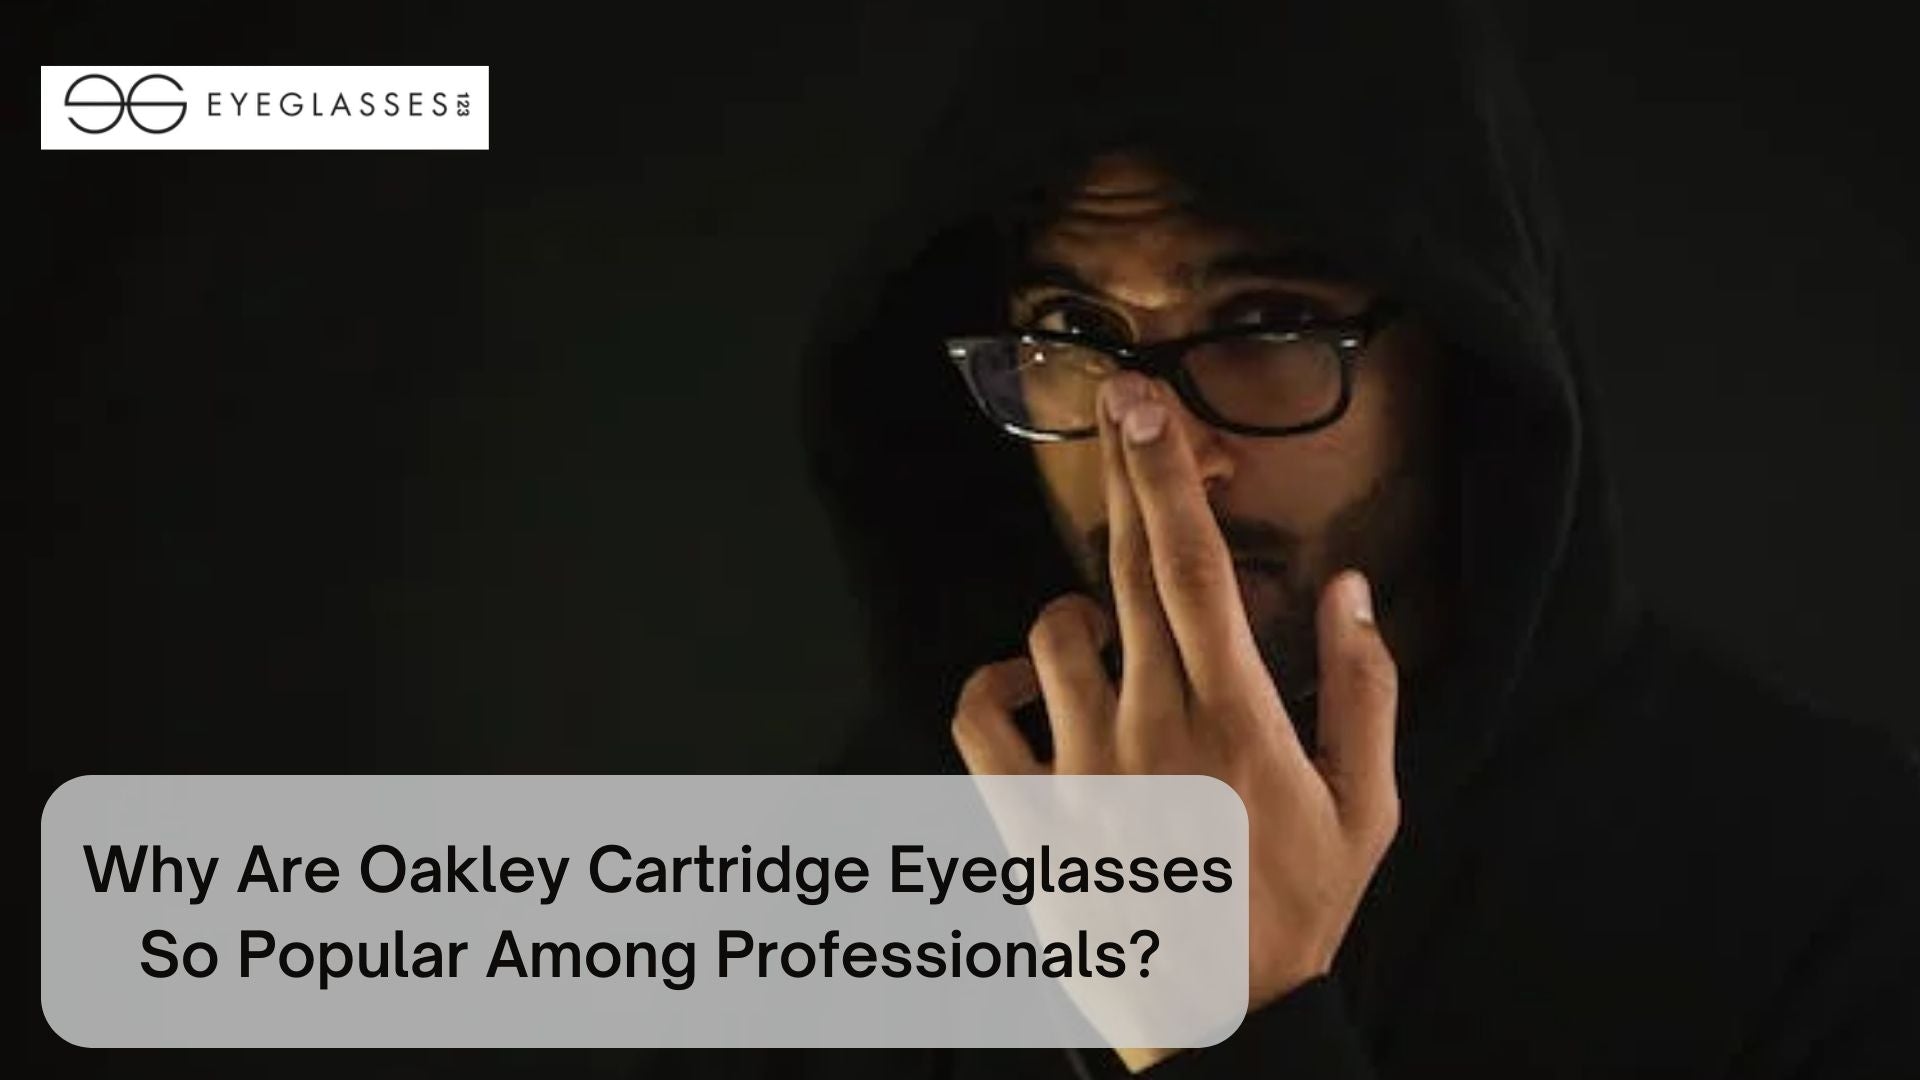 Why Are Oakley Cartridge Eyeglasses So Popular Among Professionals? 